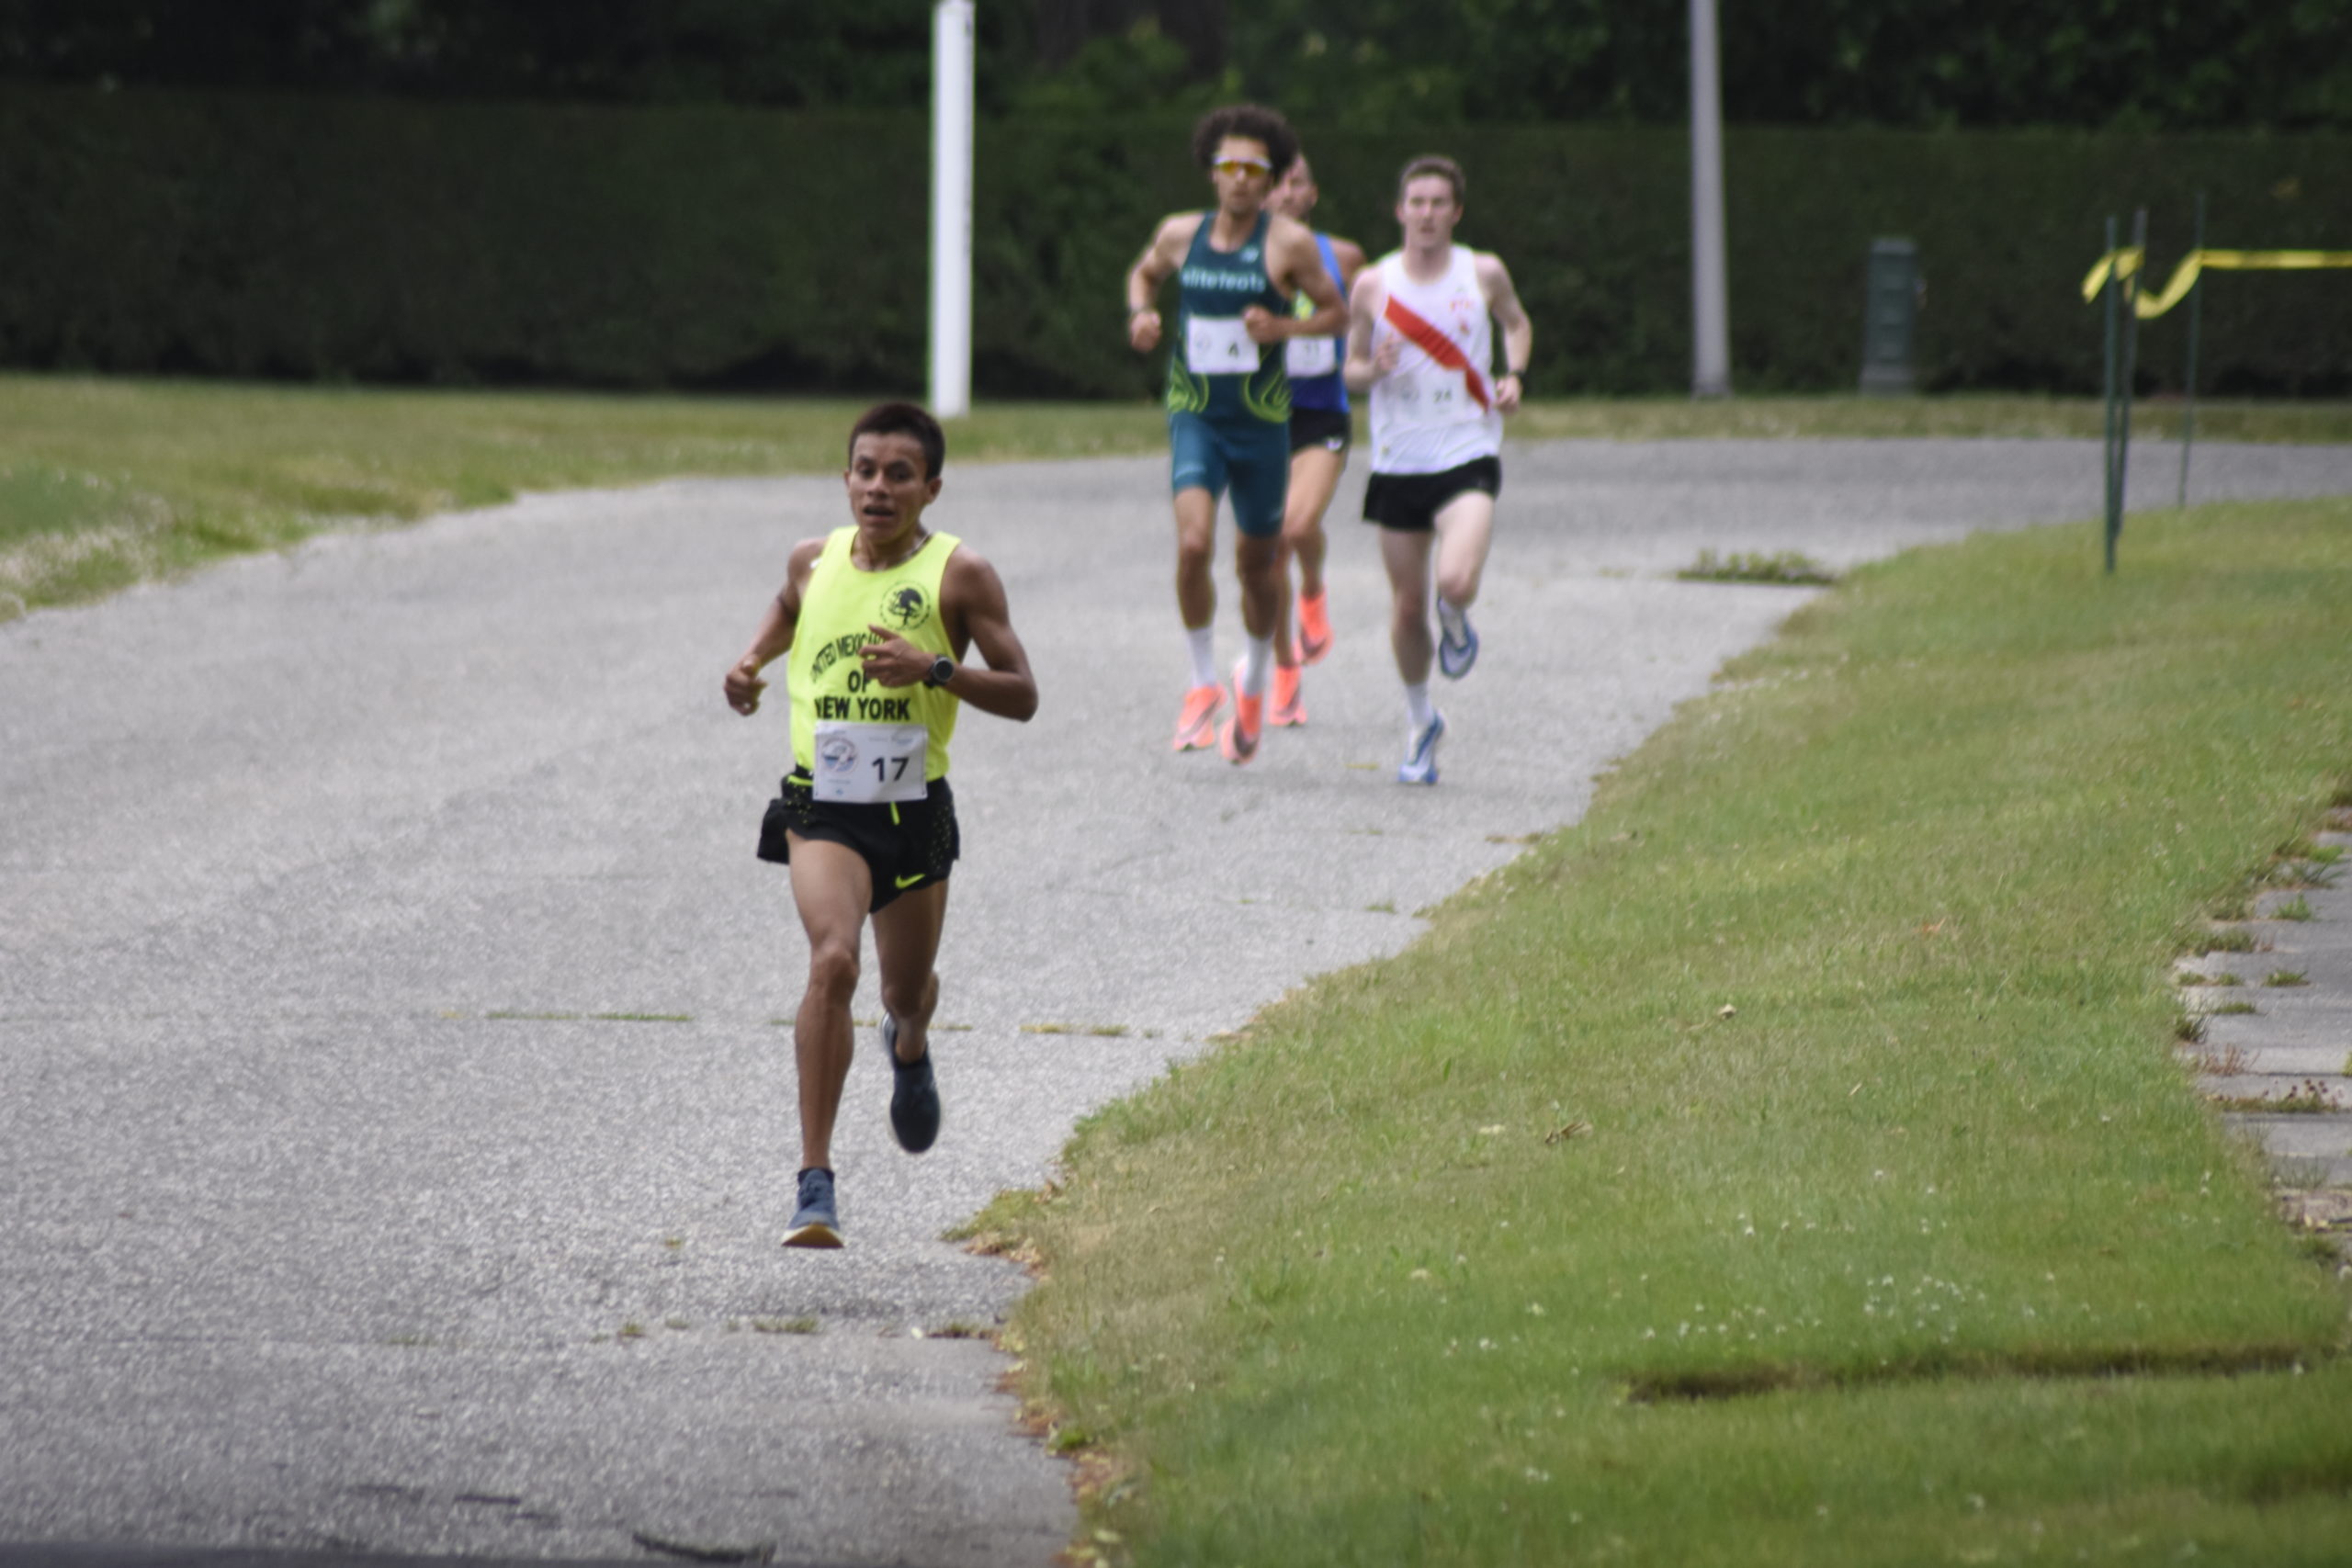 Patricio Castillo broke away from the pack a few times on Saturday but ultimately placed second overall in the 10K.